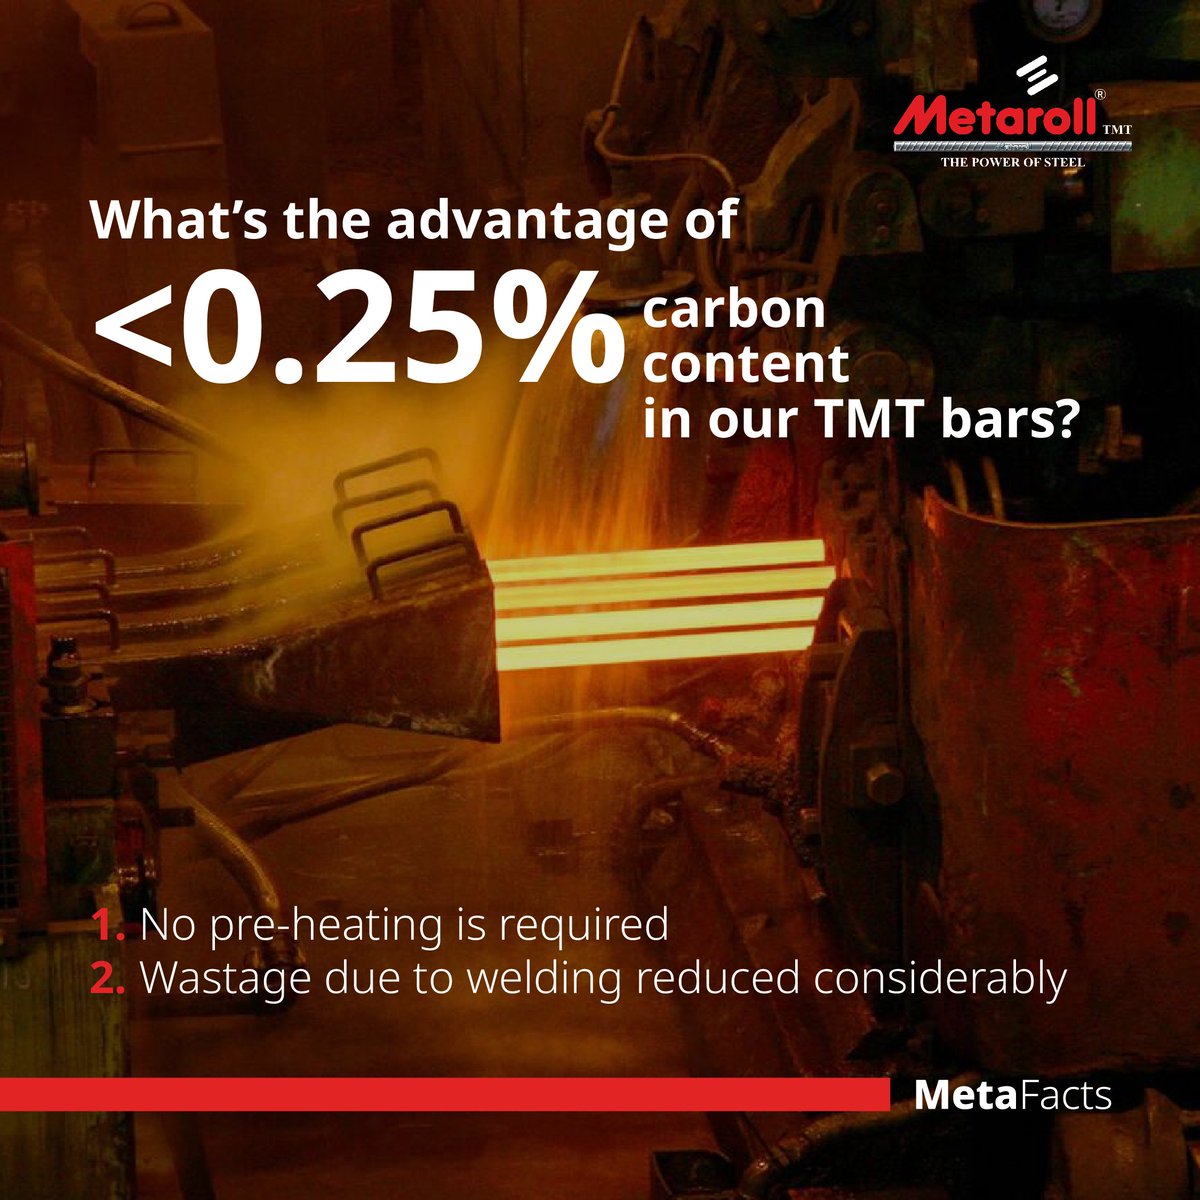 Back with its second interesting info in the series.

Did you know this? Learn more with Metafacts.

#Metarolls #Metafacts #greensteel #greenprocertified #germantechnology #madewithlrftechnology #puresteel #thepowerofsteel #steel #manufacturing #threadedbar #tmt #tmtbars